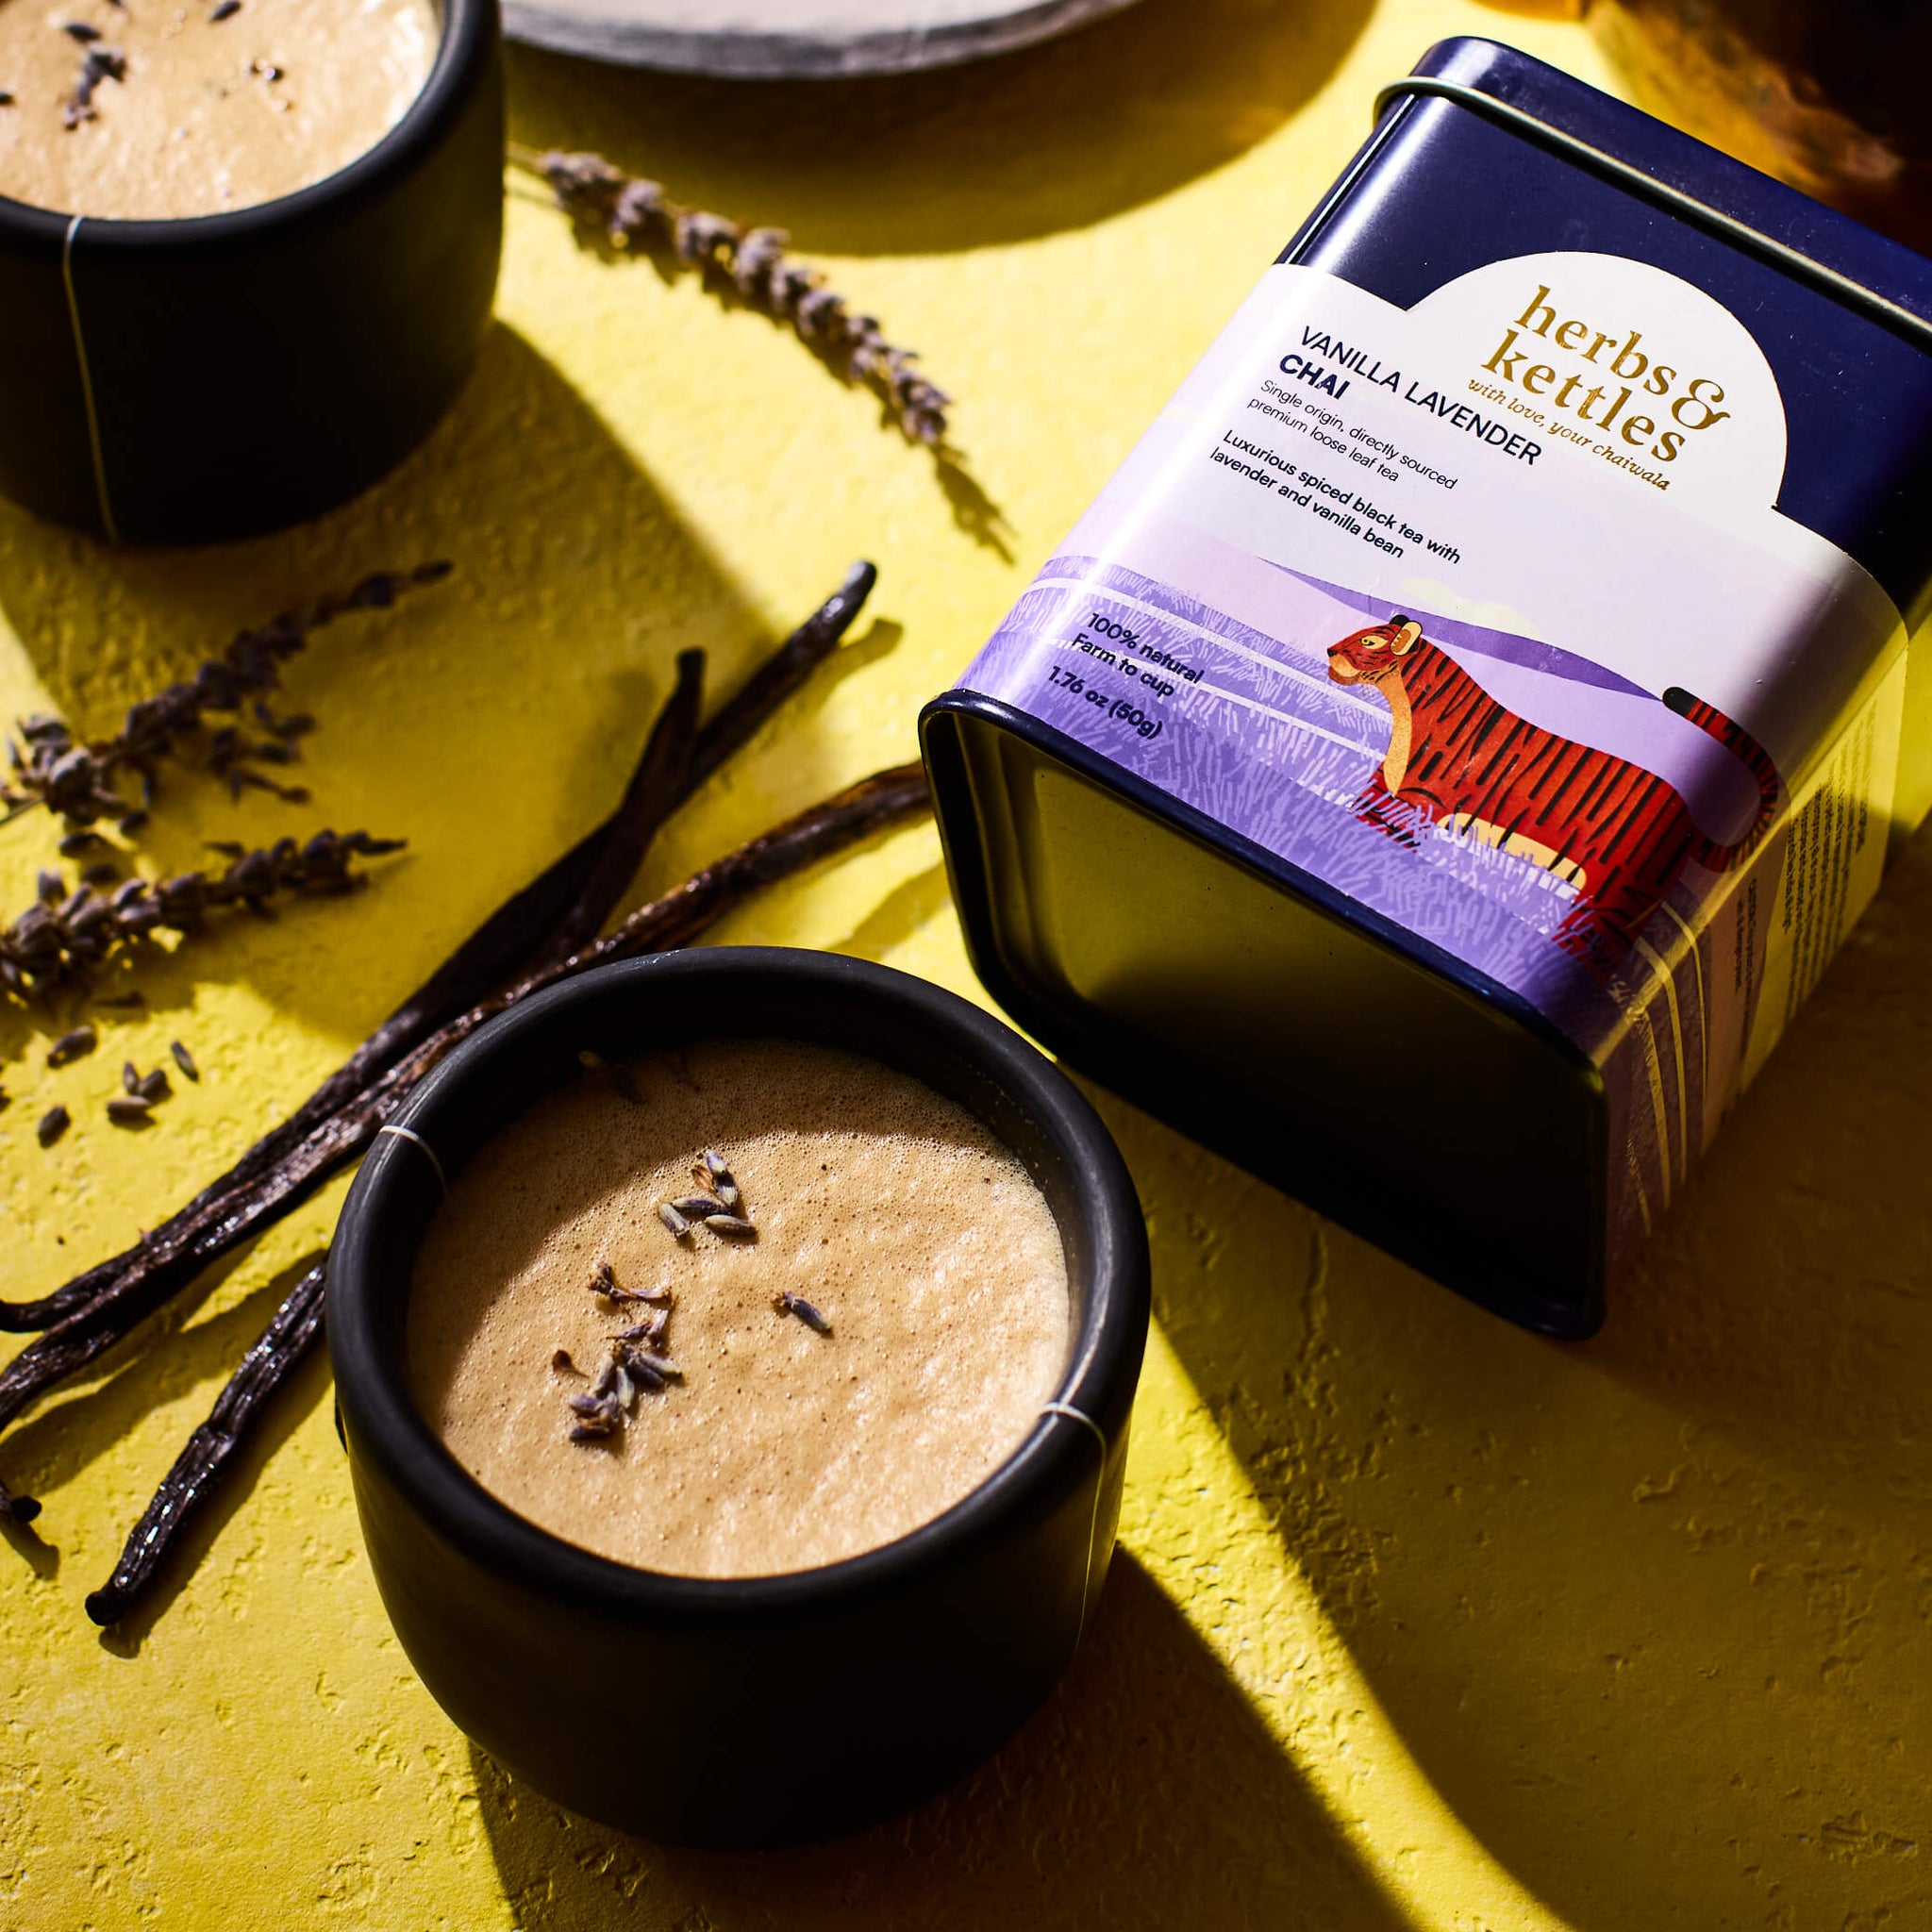 Our vanilla lavender chai is extremely luxurious and sublime